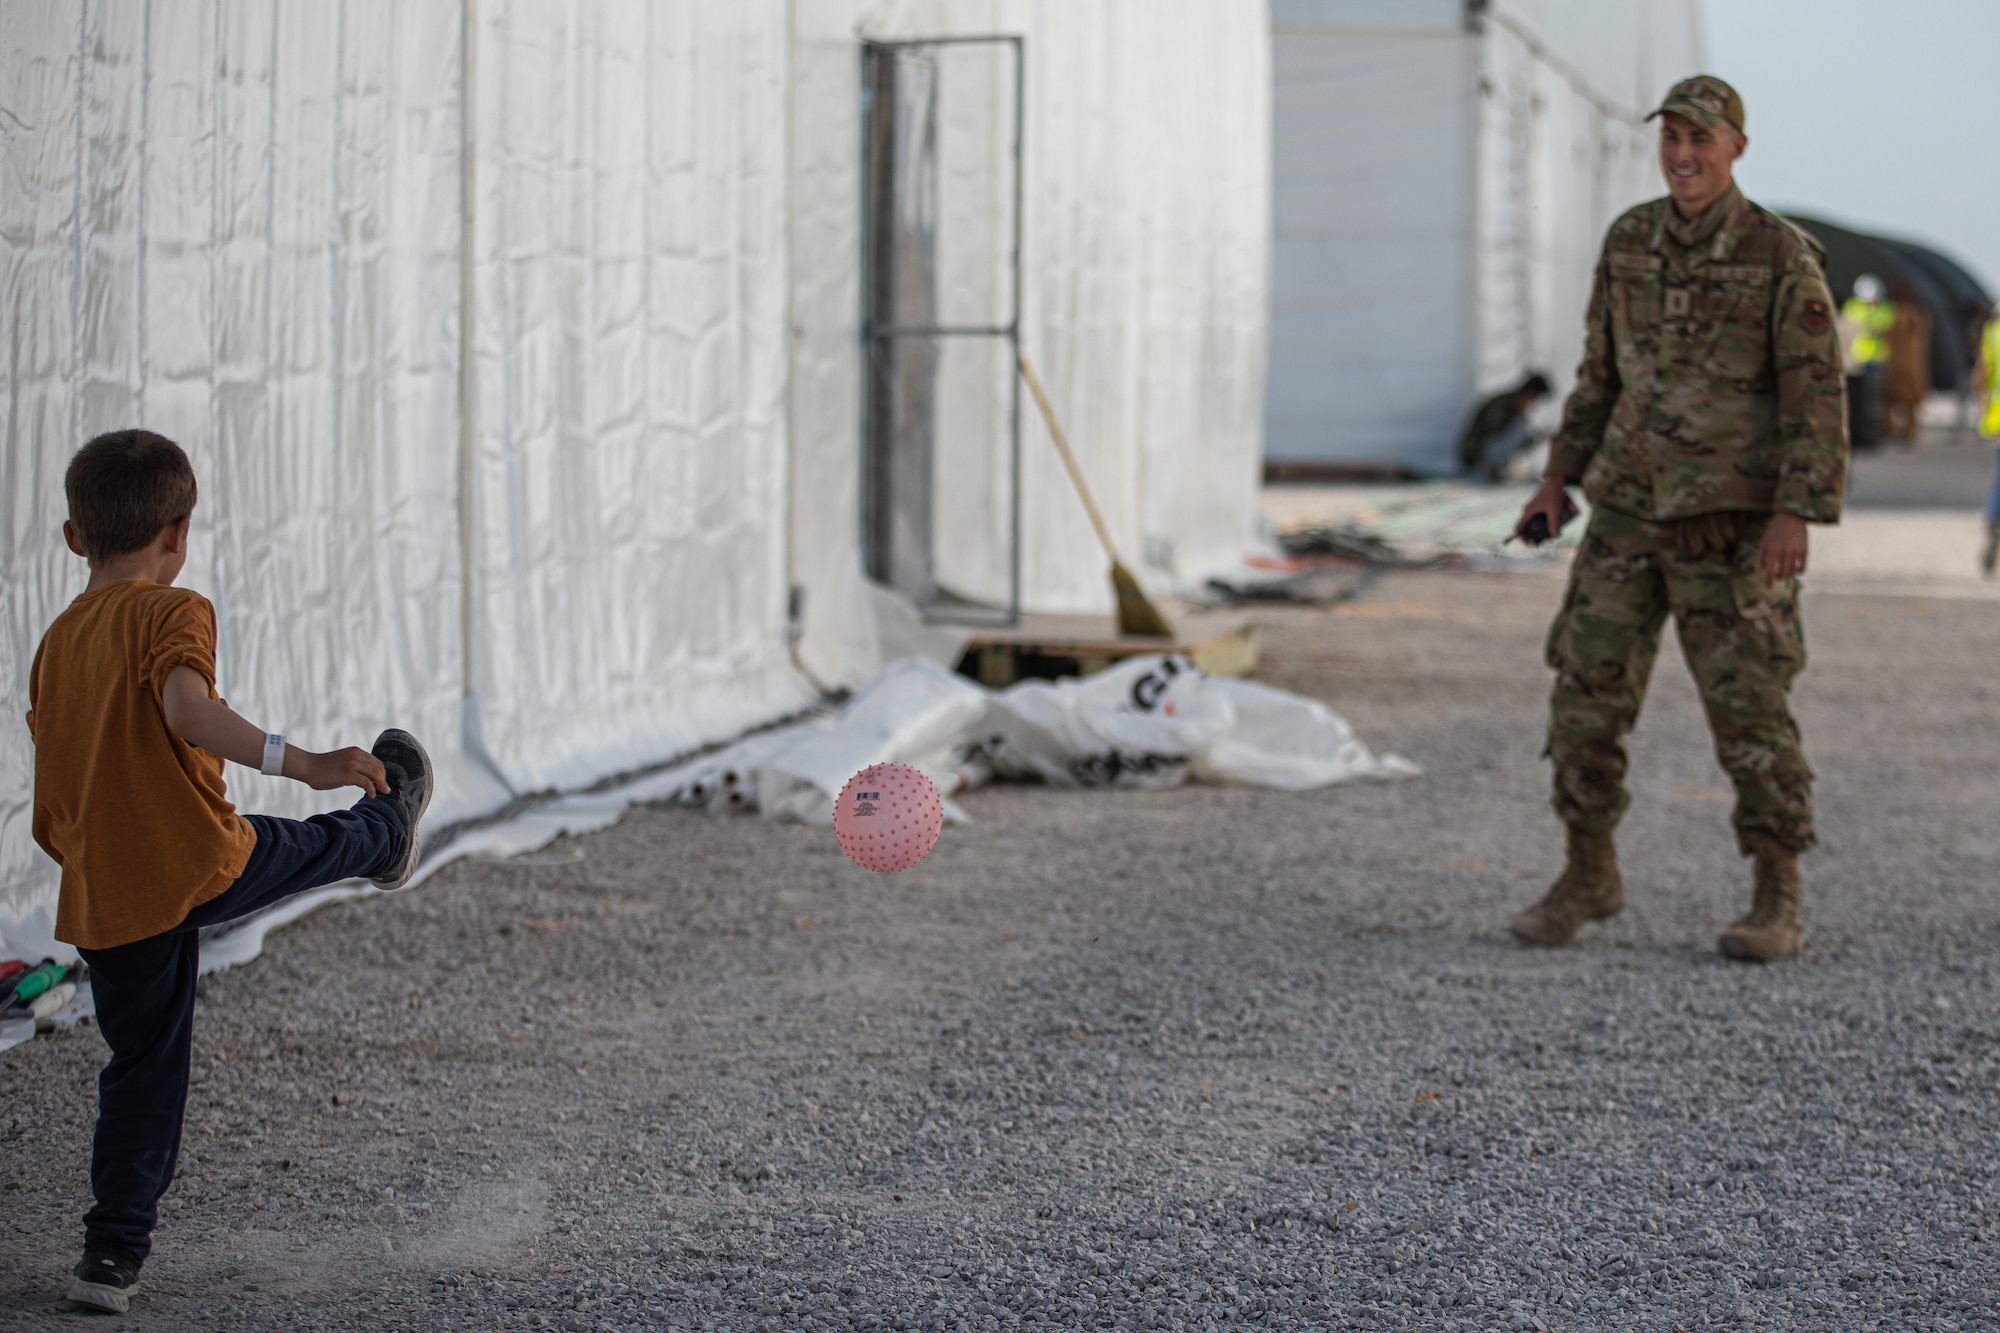 An Airman attached to Task Force-Holloman plays with an Afghan evacuee at Aman Omid Village on Holloman Air Force Base, New Mexico, Sept. 5, 2021. The Department of Defense, through U.S. Northern Command, and in support of the Department of State and Department of Homeland Security, is providing transportation, temporary housing, medical screening, and general support for at least 50,000 Afghan evacuees at suitable facilities, in permanent or temporary structures, as quickly as possible. This initiative provides Afghan evacuees essential support at secure locations outside Afghanistan. (U.S. Army photo by Pfc. Anthony Sanchez)